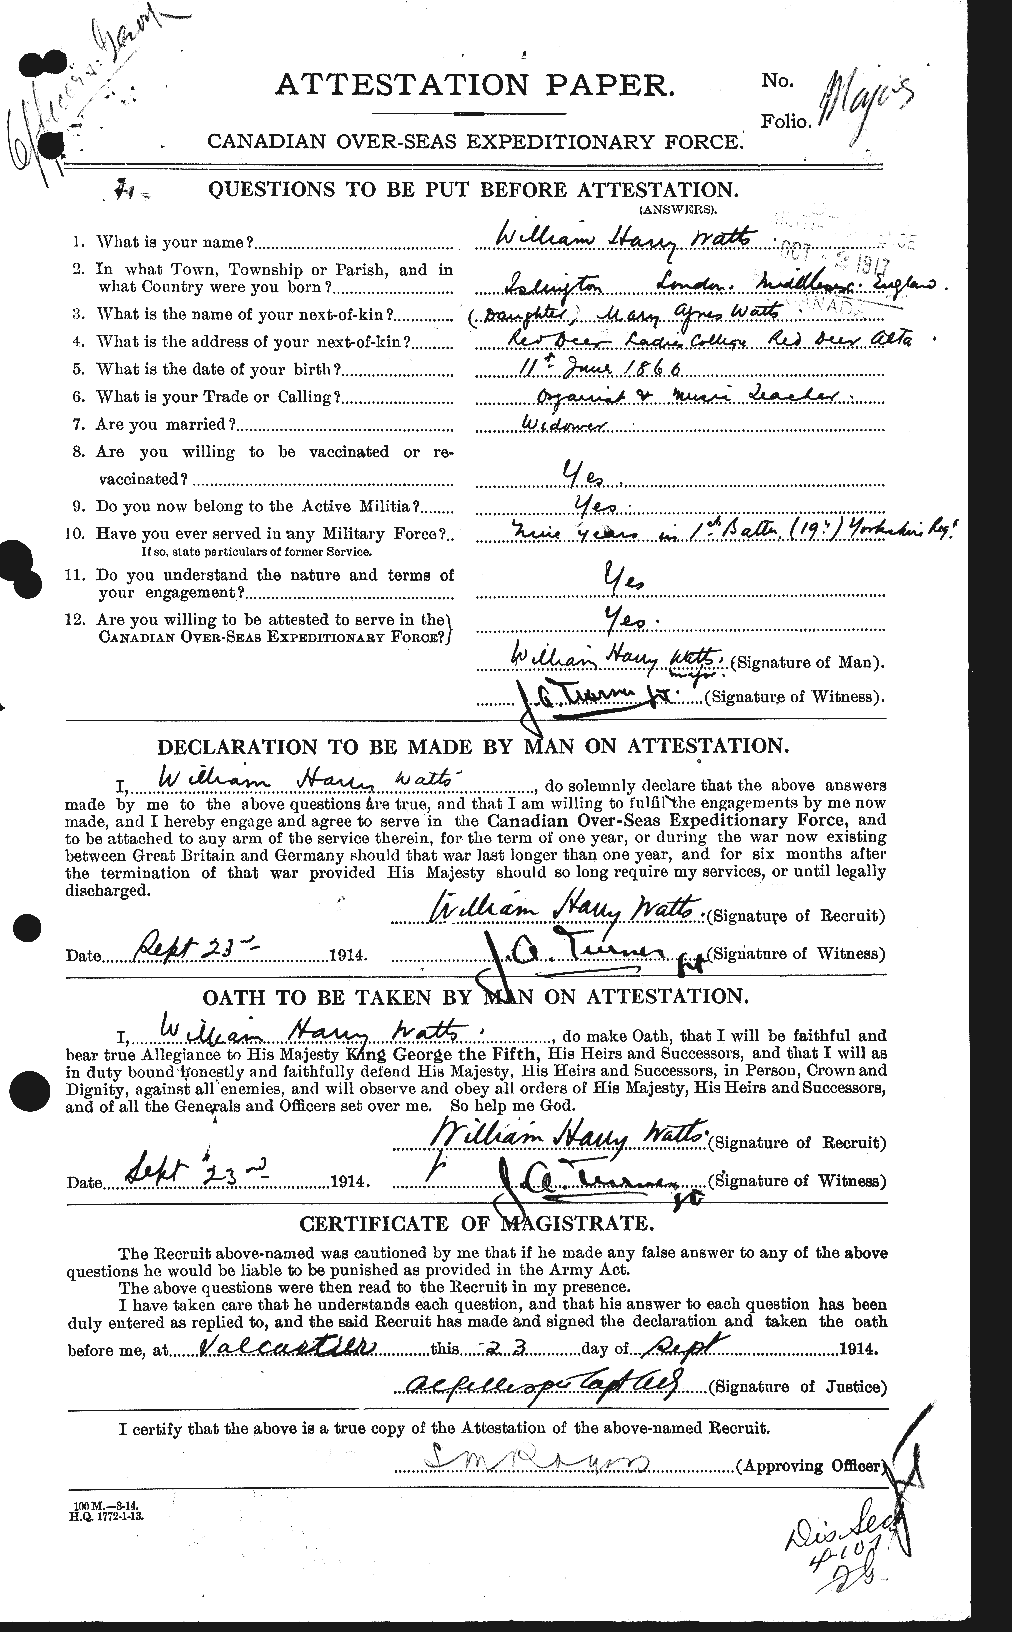 Personnel Records of the First World War - CEF 662940a